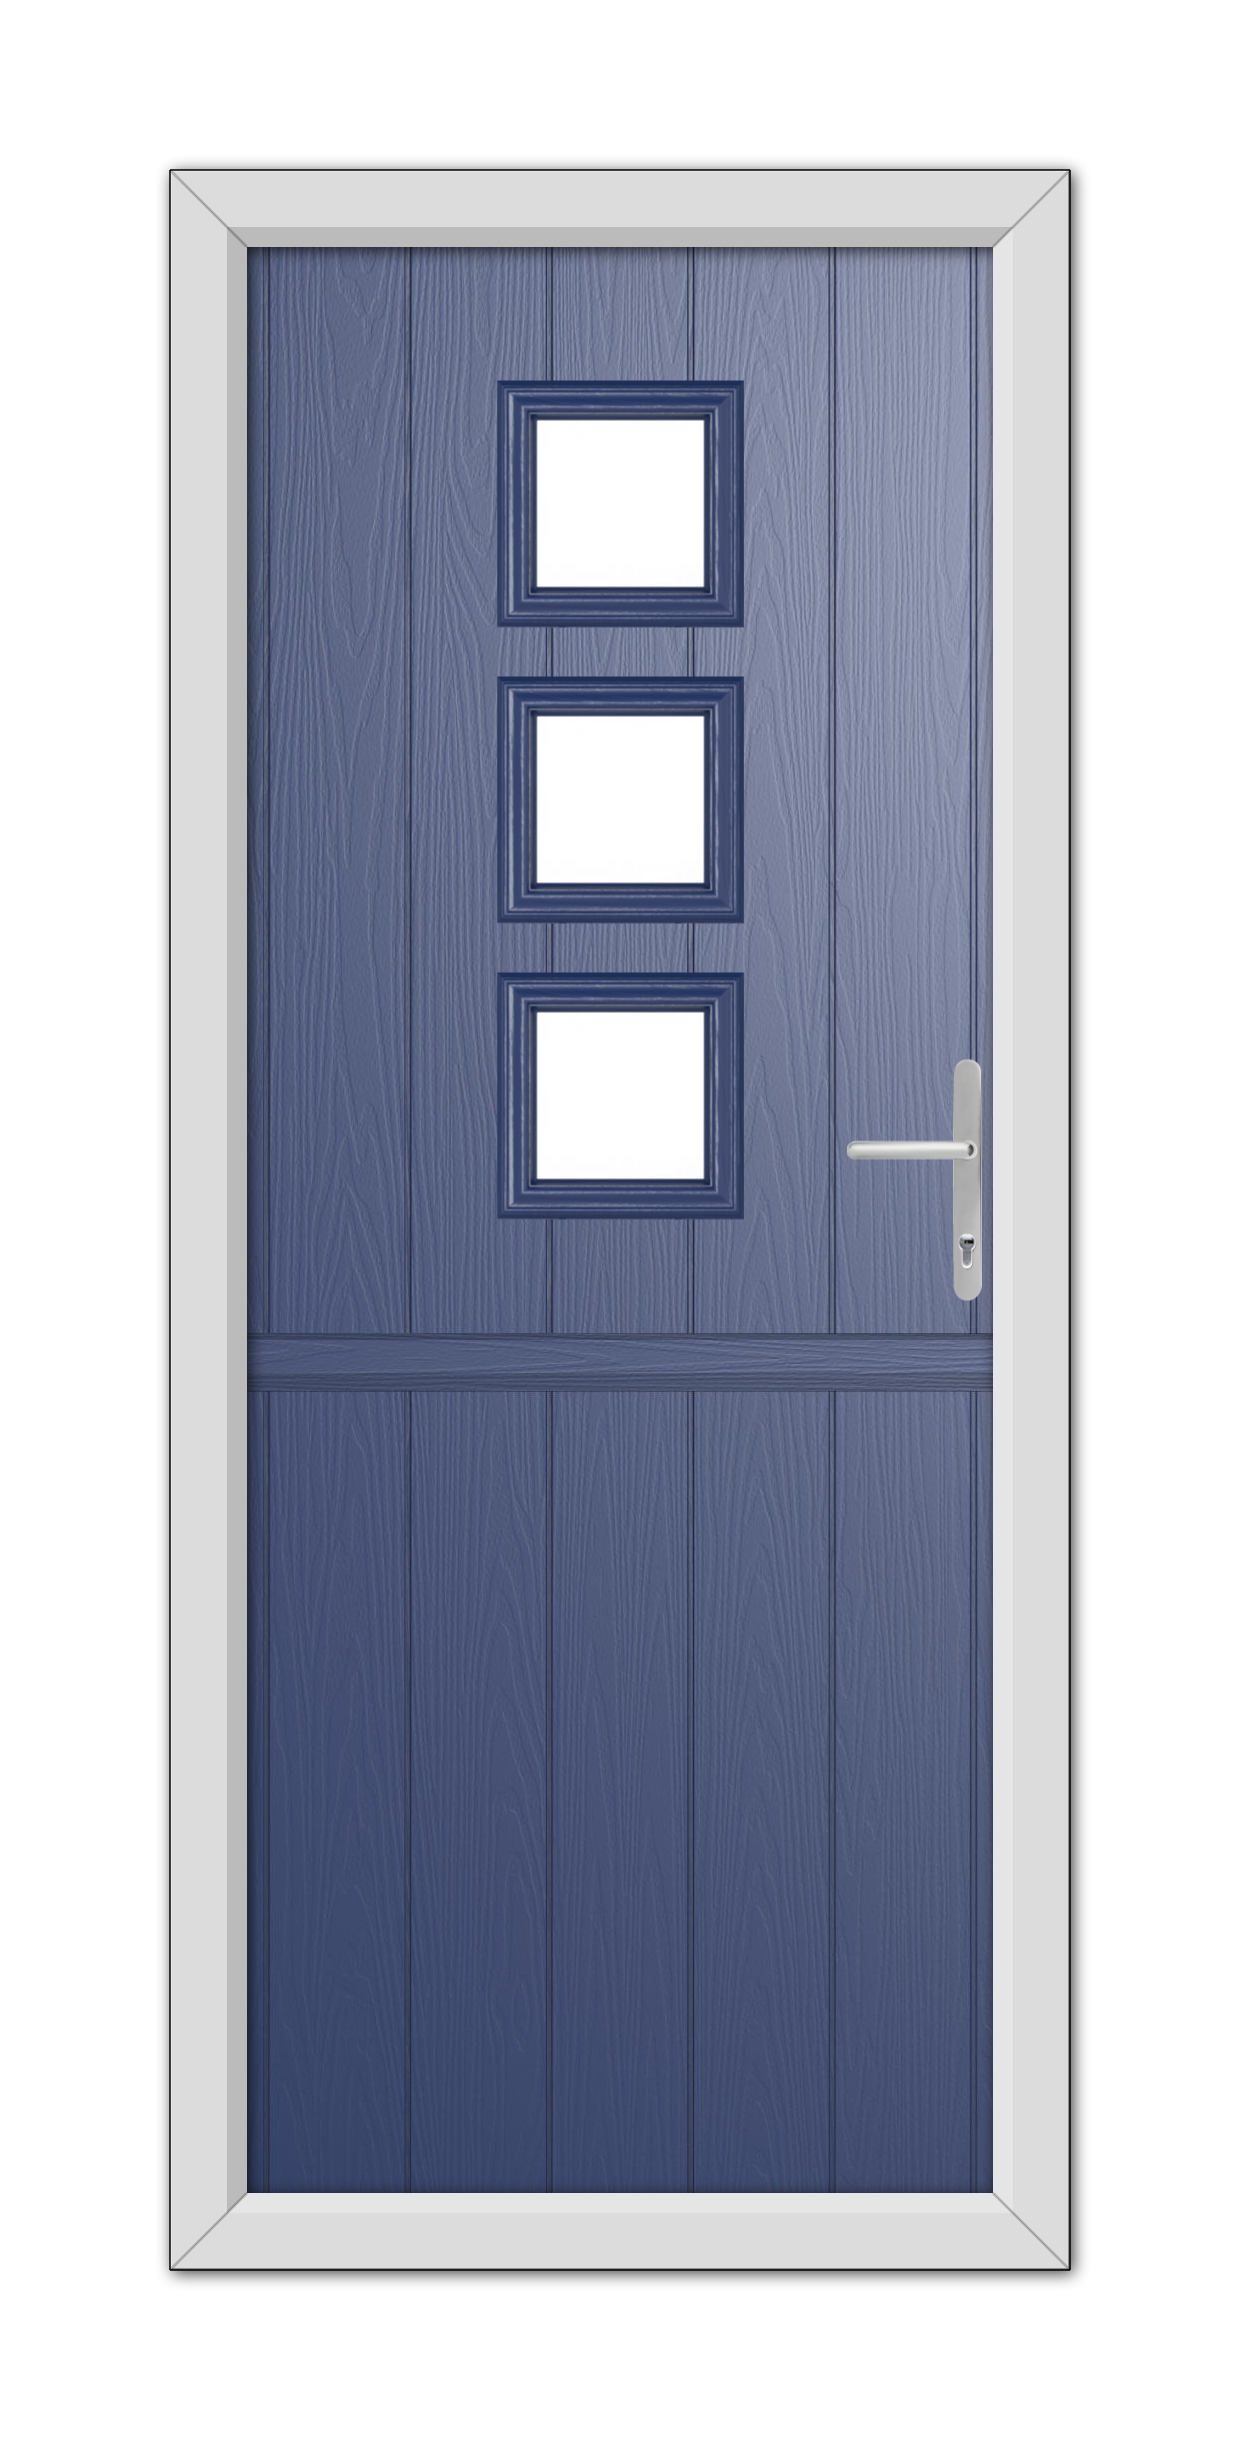 A Blue Montrose Stable Composite Door 48mm Timber Core with a white frame featuring three rectangular windows and a silver handle, set against a white background.